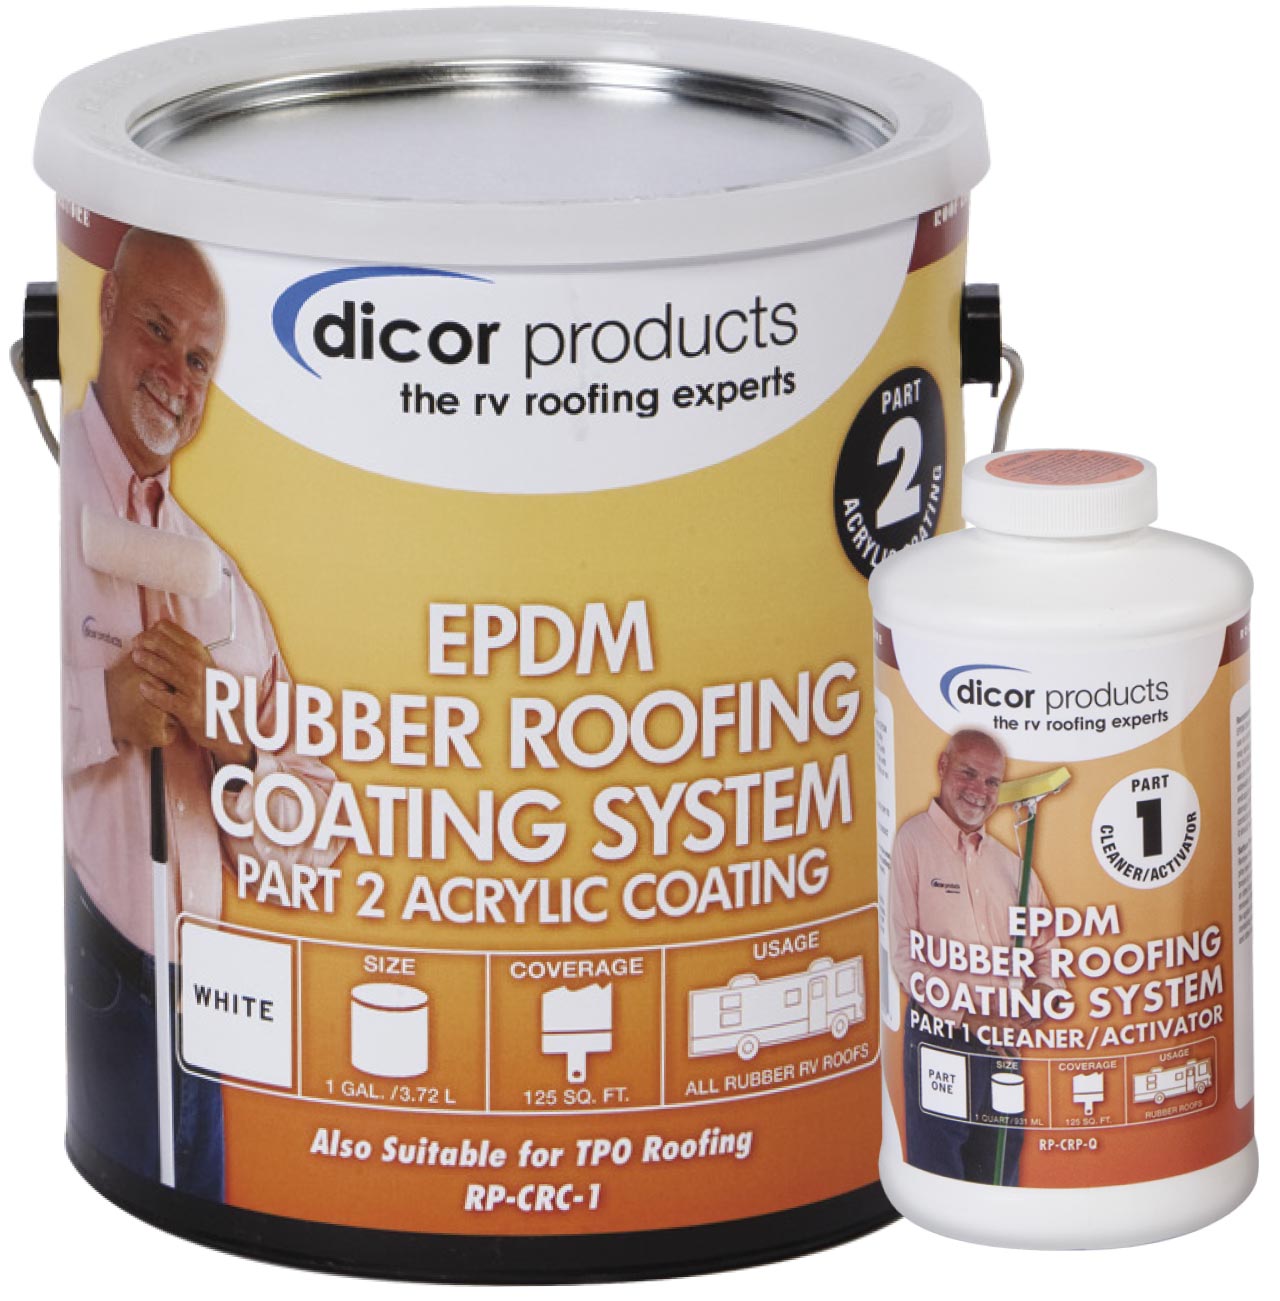 EPDM Rubber Roofing Coating System supplies